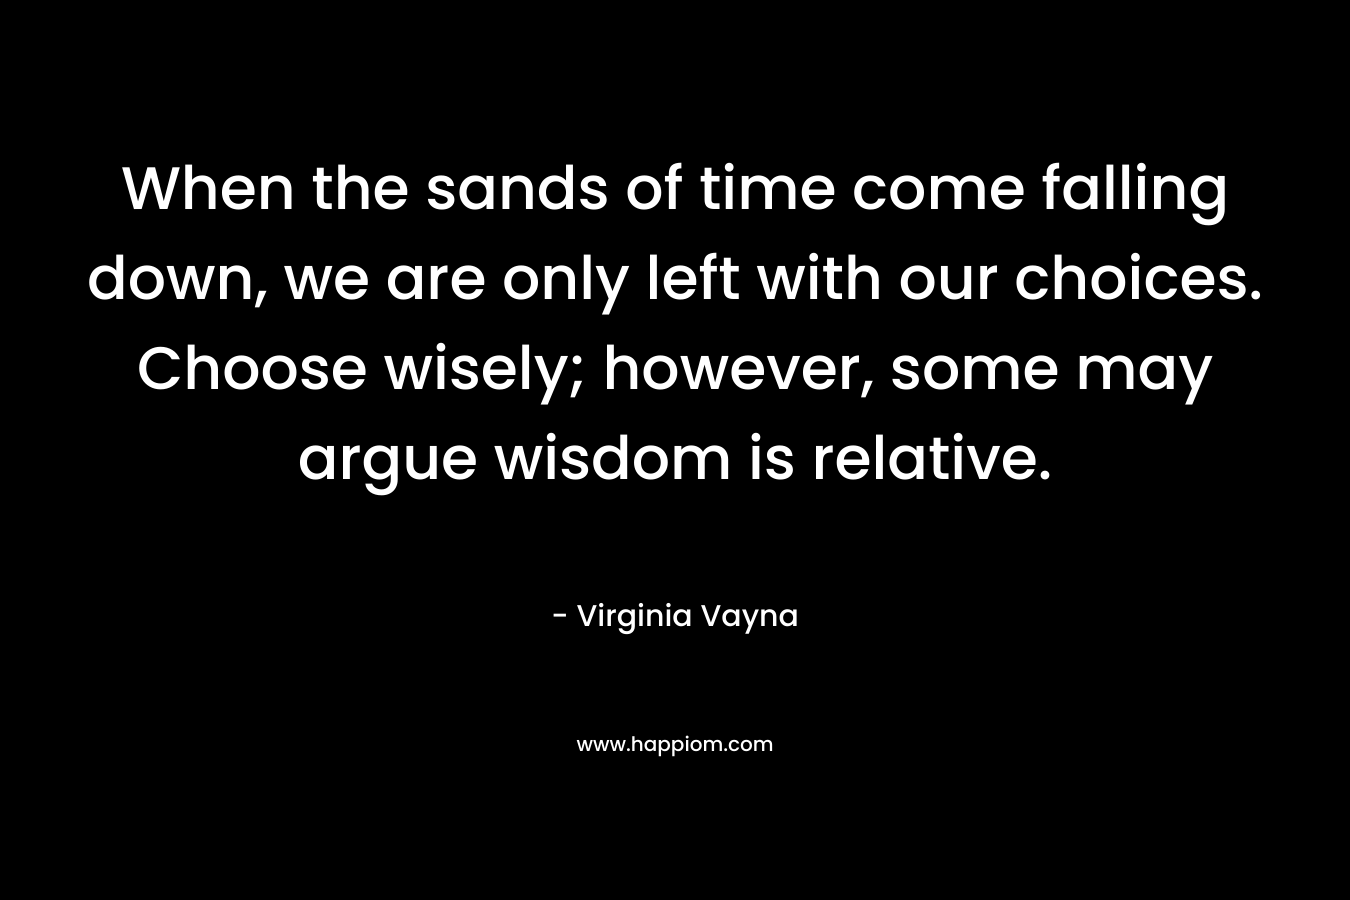 When the sands of time come falling down, we are only left with our choices. Choose wisely; however, some may argue wisdom is relative. – Virginia Vayna